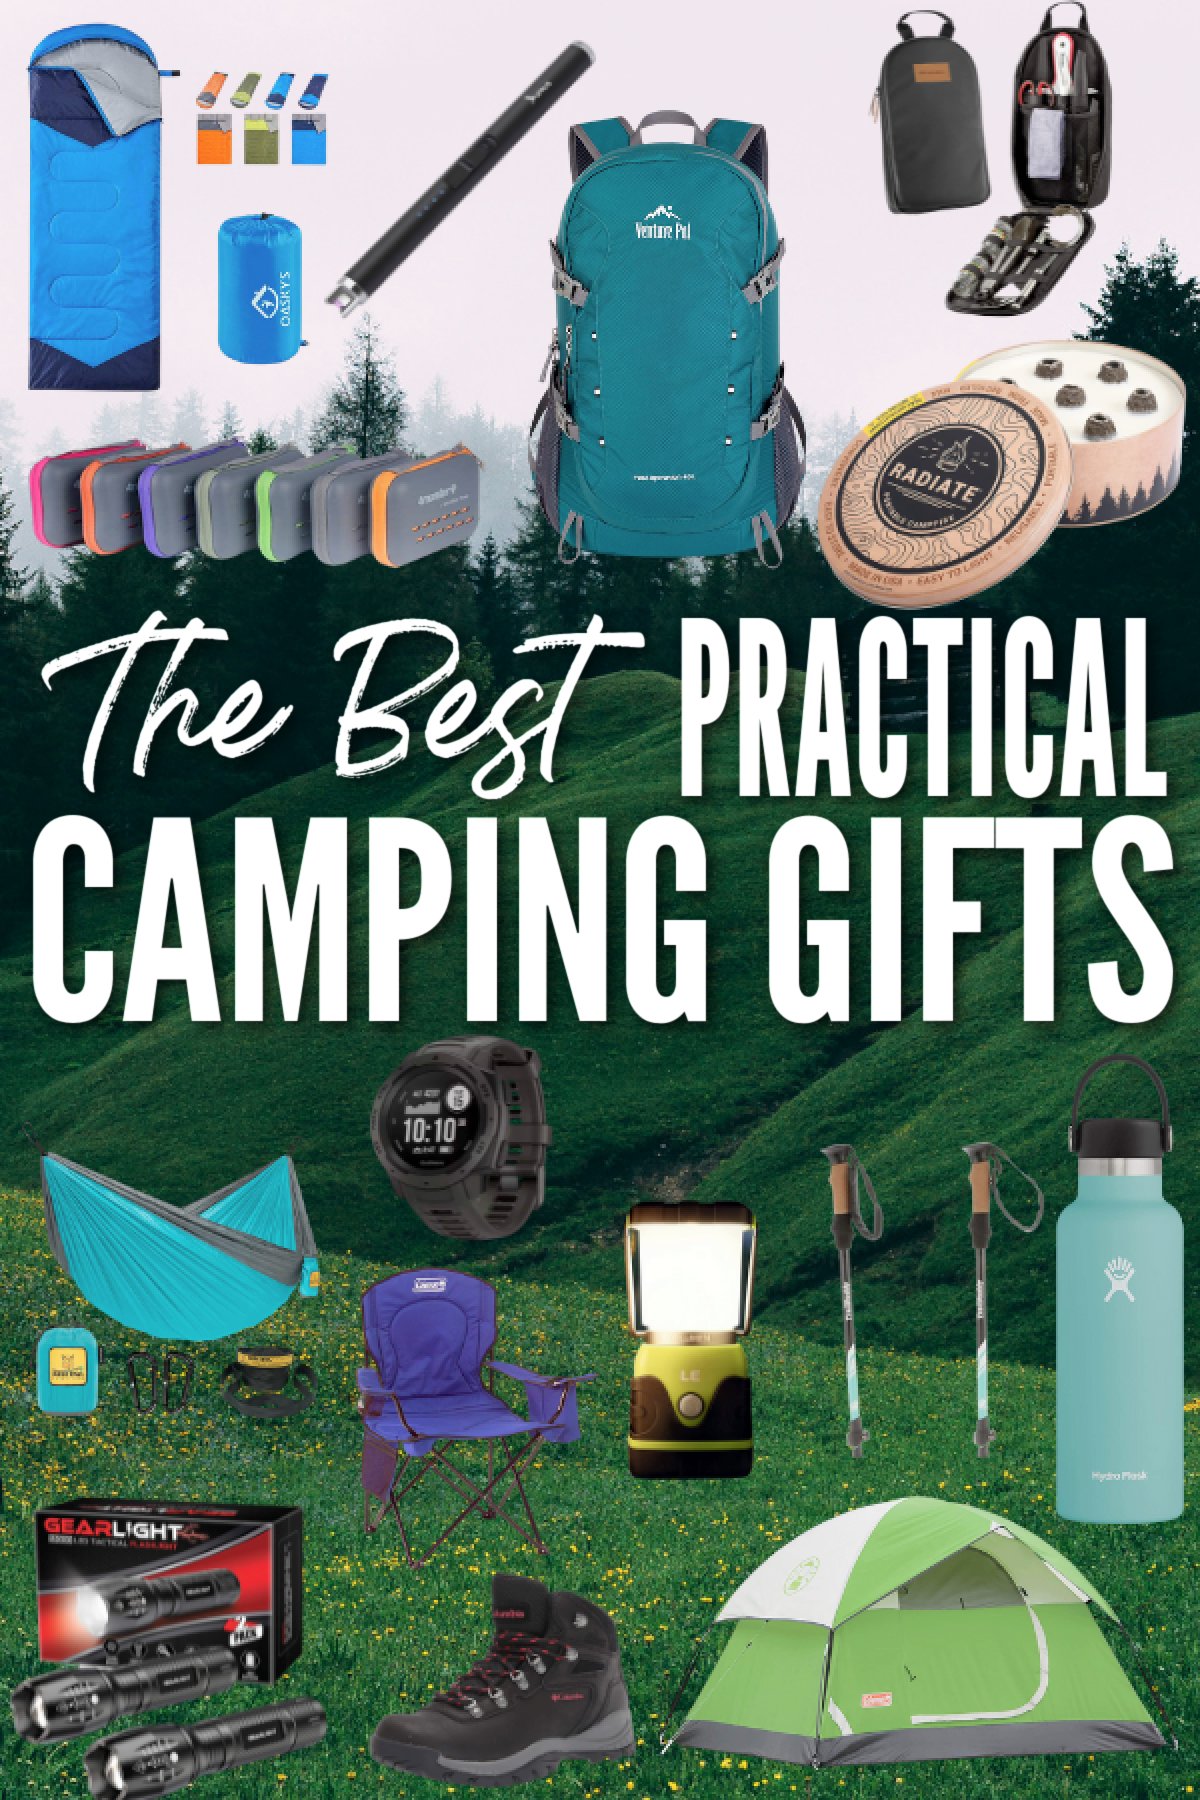 https://www.thecampfirecalls.com/wp-content/uploads/2021/12/practical-camping-gifts.png